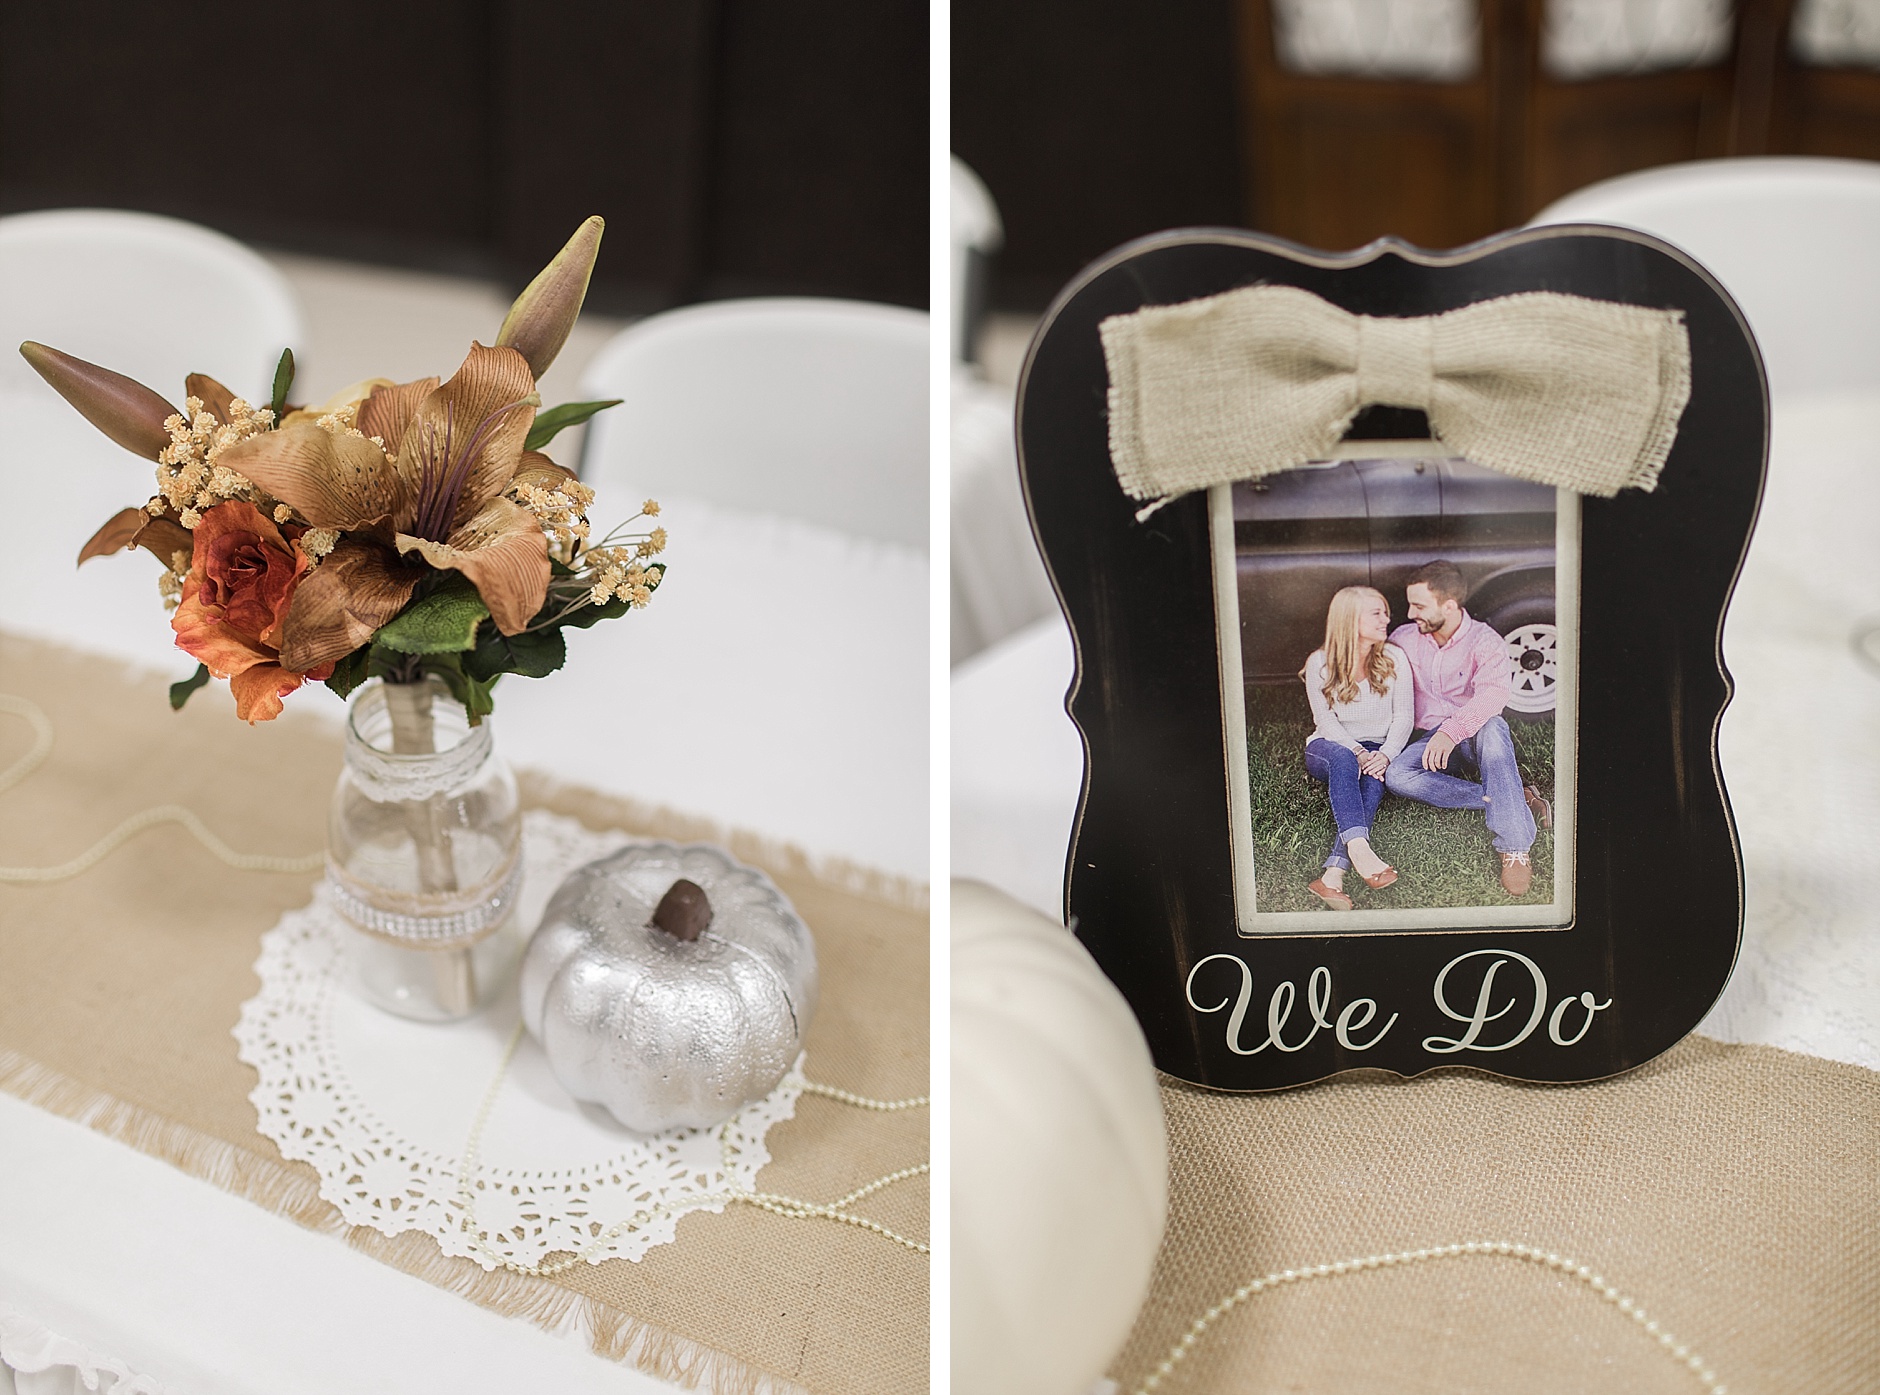 An Early Fall Navy and Blue Wedding in Clinton, Kentucky by Rachael Houser Photography